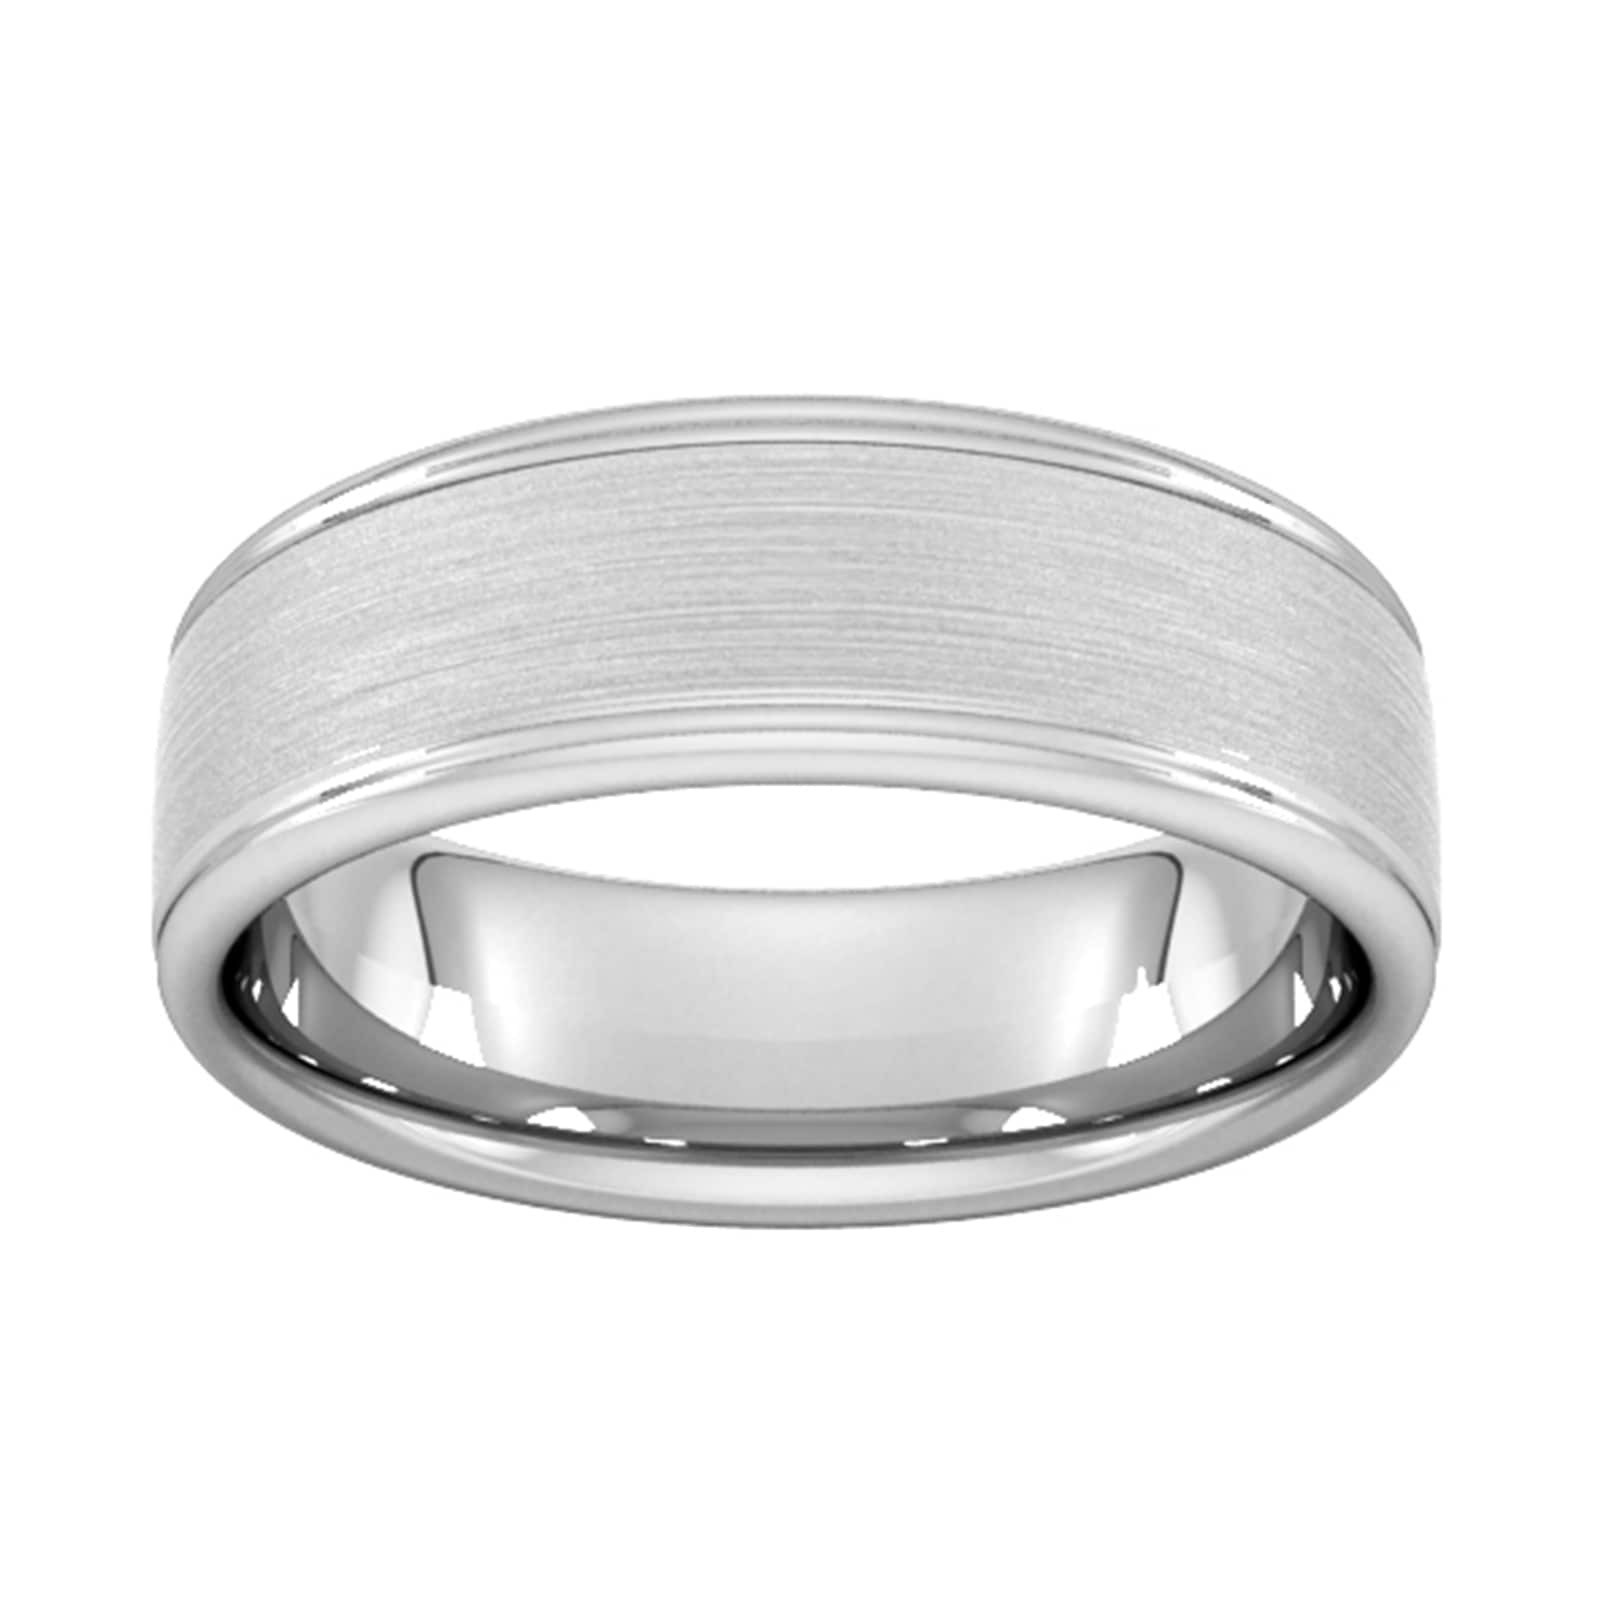 7mm Slight Court Standard Matt Centre With Grooves Wedding Ring In 18 Carat White Gold - Ring Size X